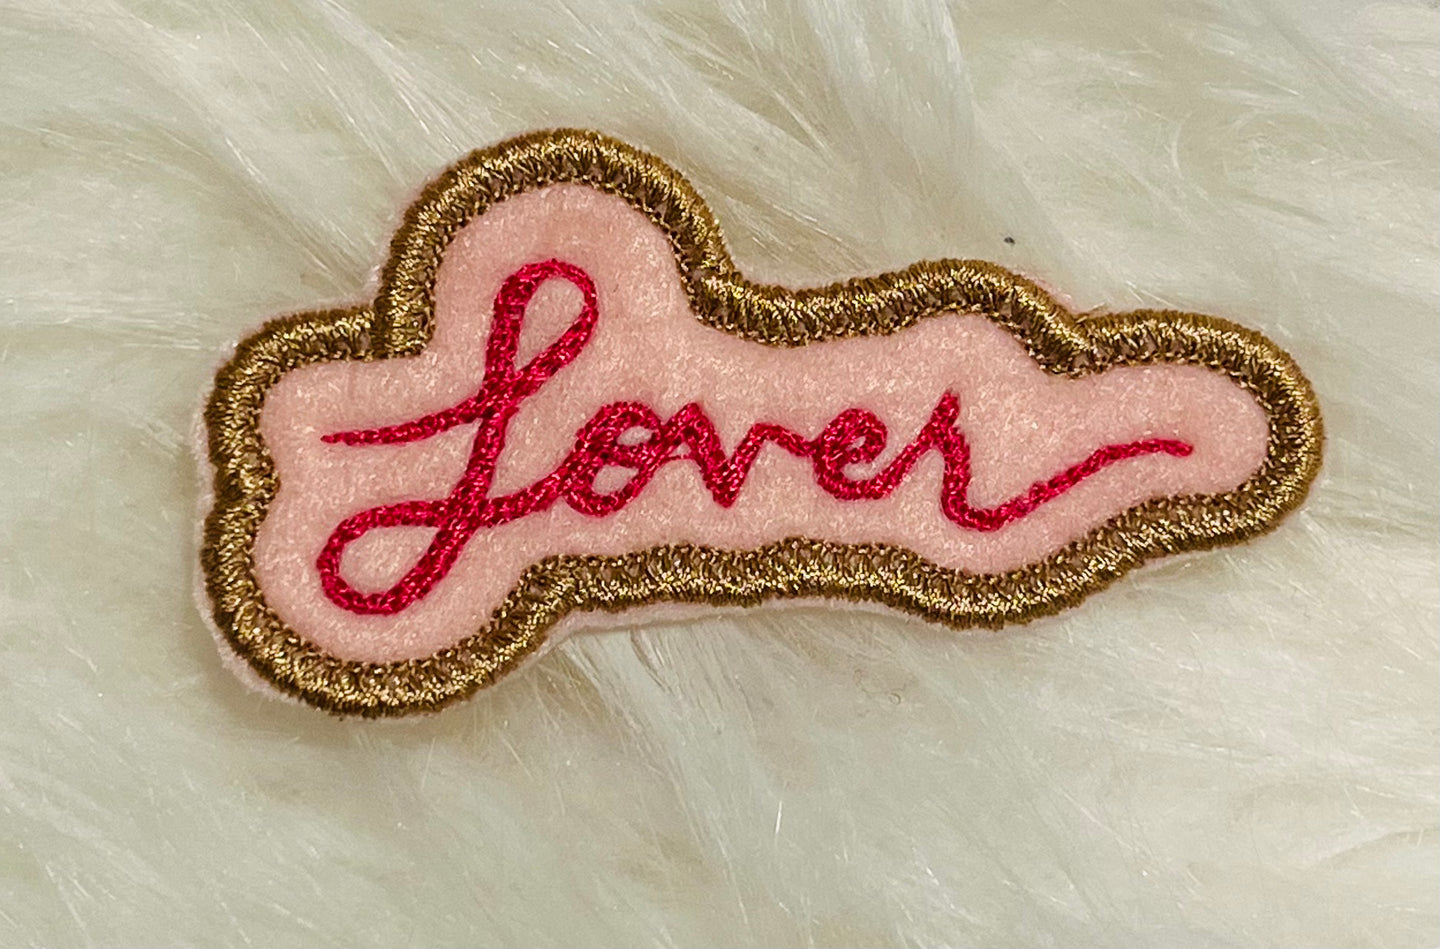 Lover patches arrived 💕 : r/TaylorSwift